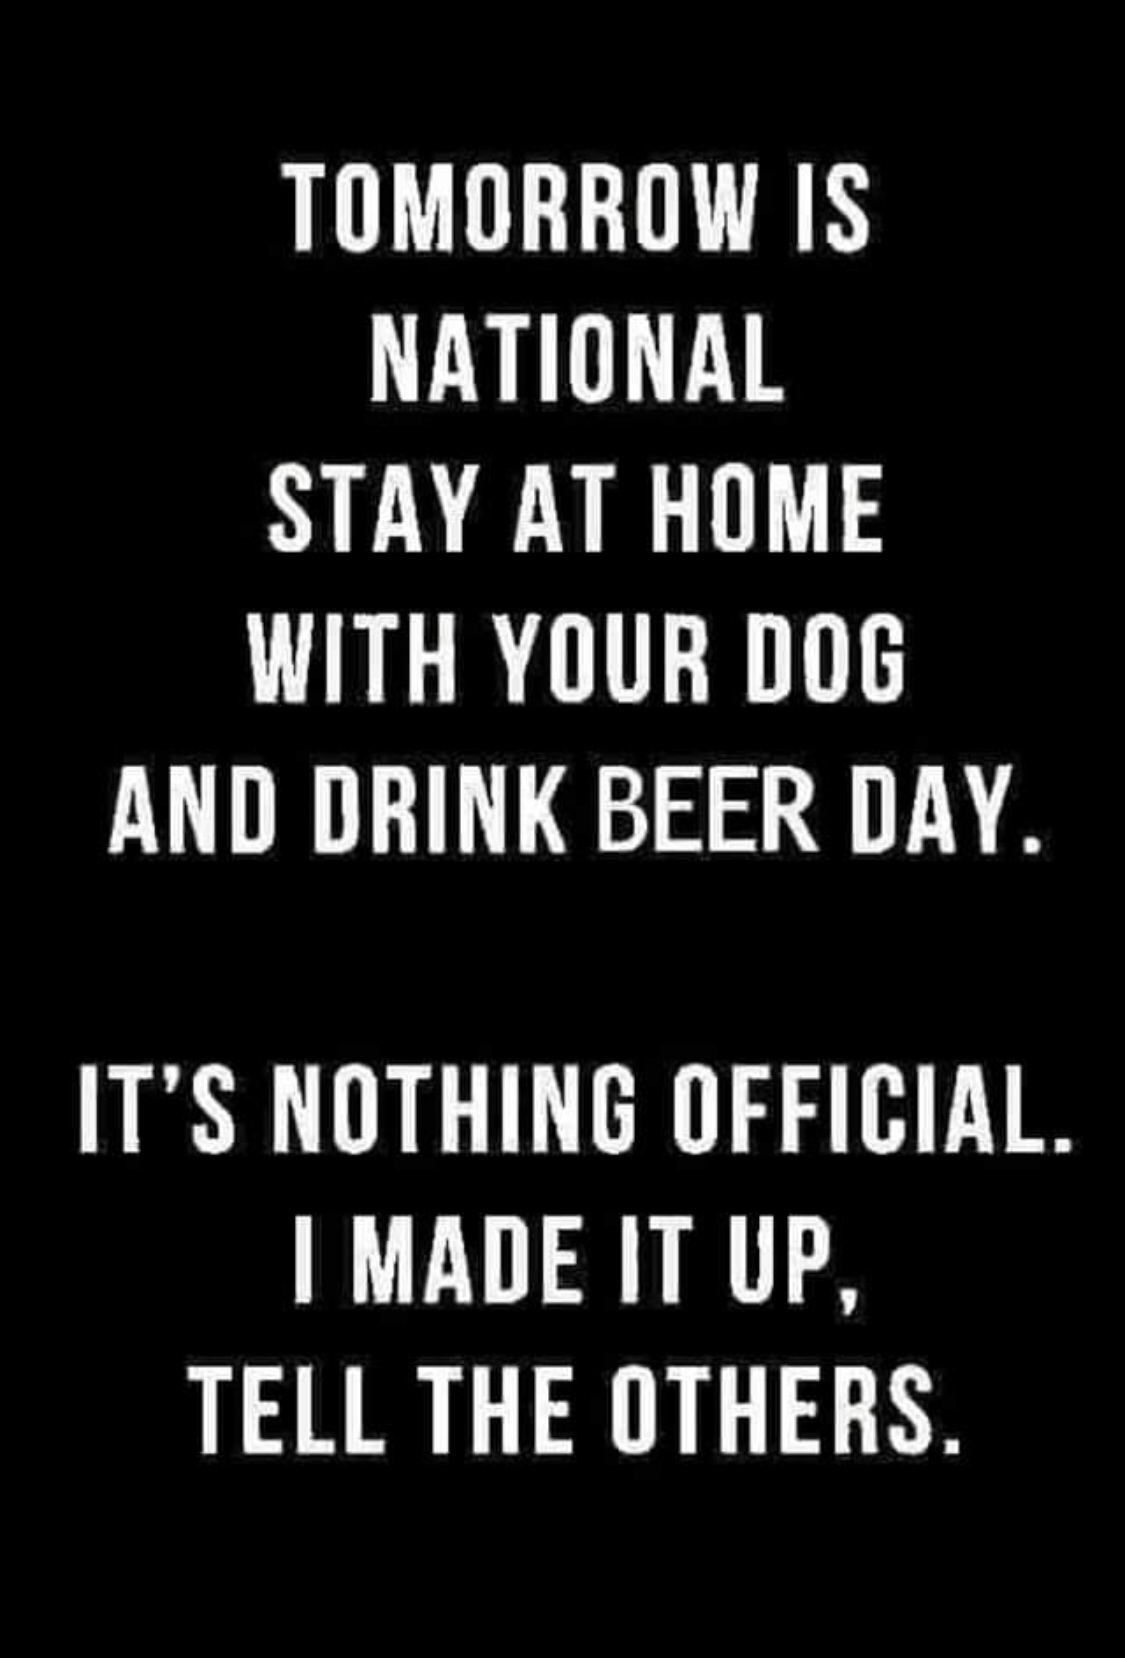 stay at home and drink beer with your dog day - Tomorrow Is National Stay At Home With Your Dog And Drink Beer Day. It'S Nothing Official. I Made It Up, Tell The Others.